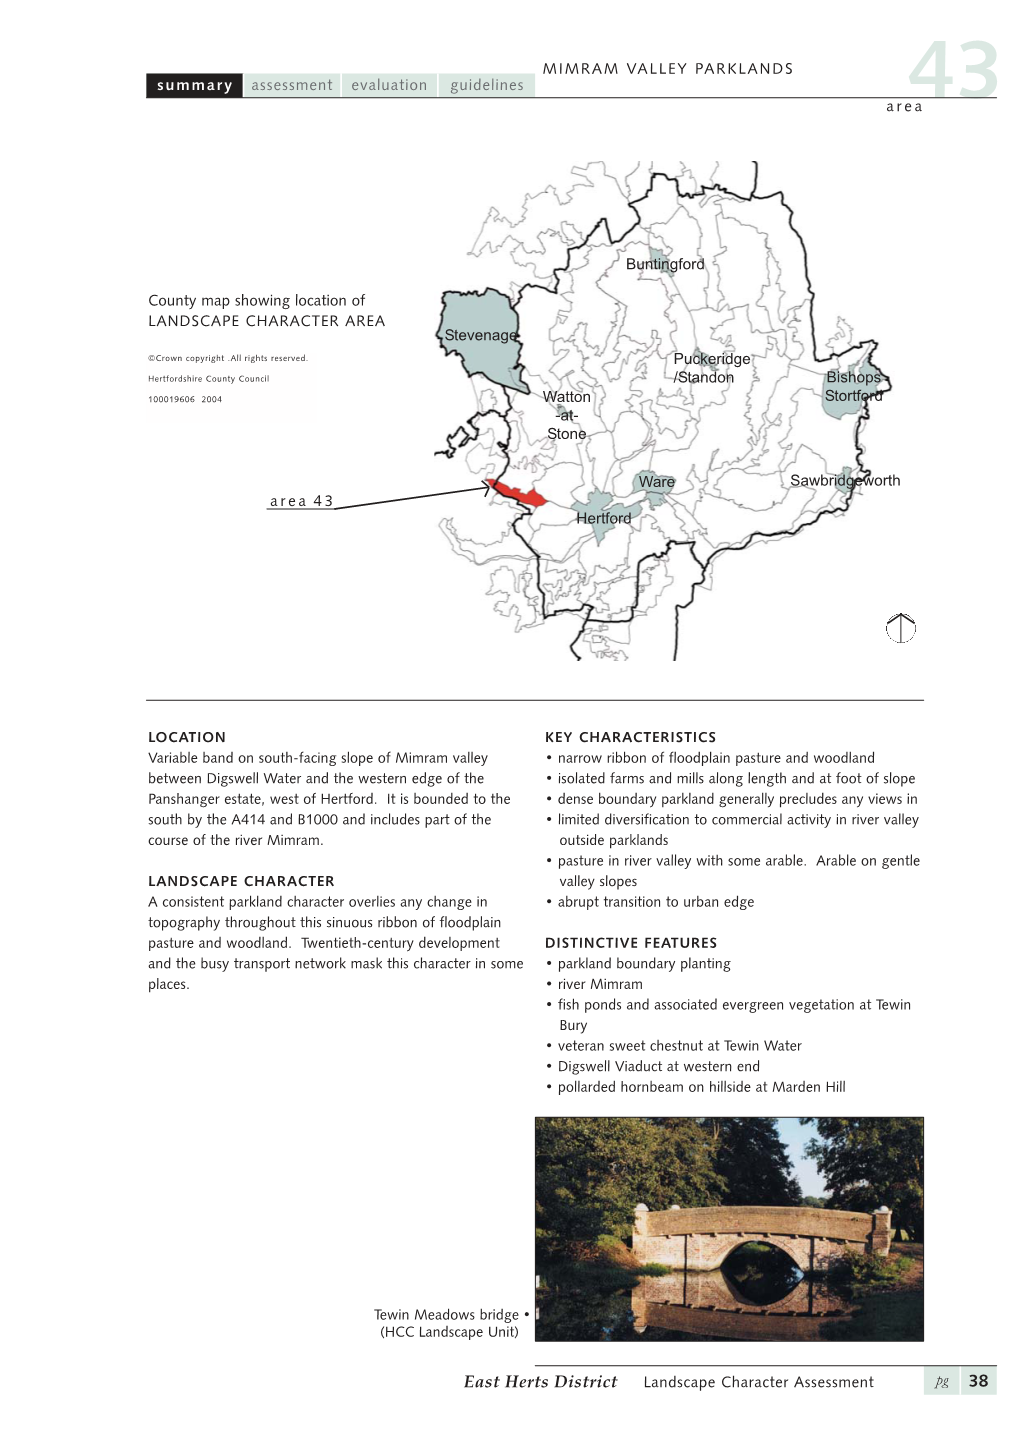 MIMRAM VALLEY PARKLANDS Summary Assessment Evaluation Guidelines Area43